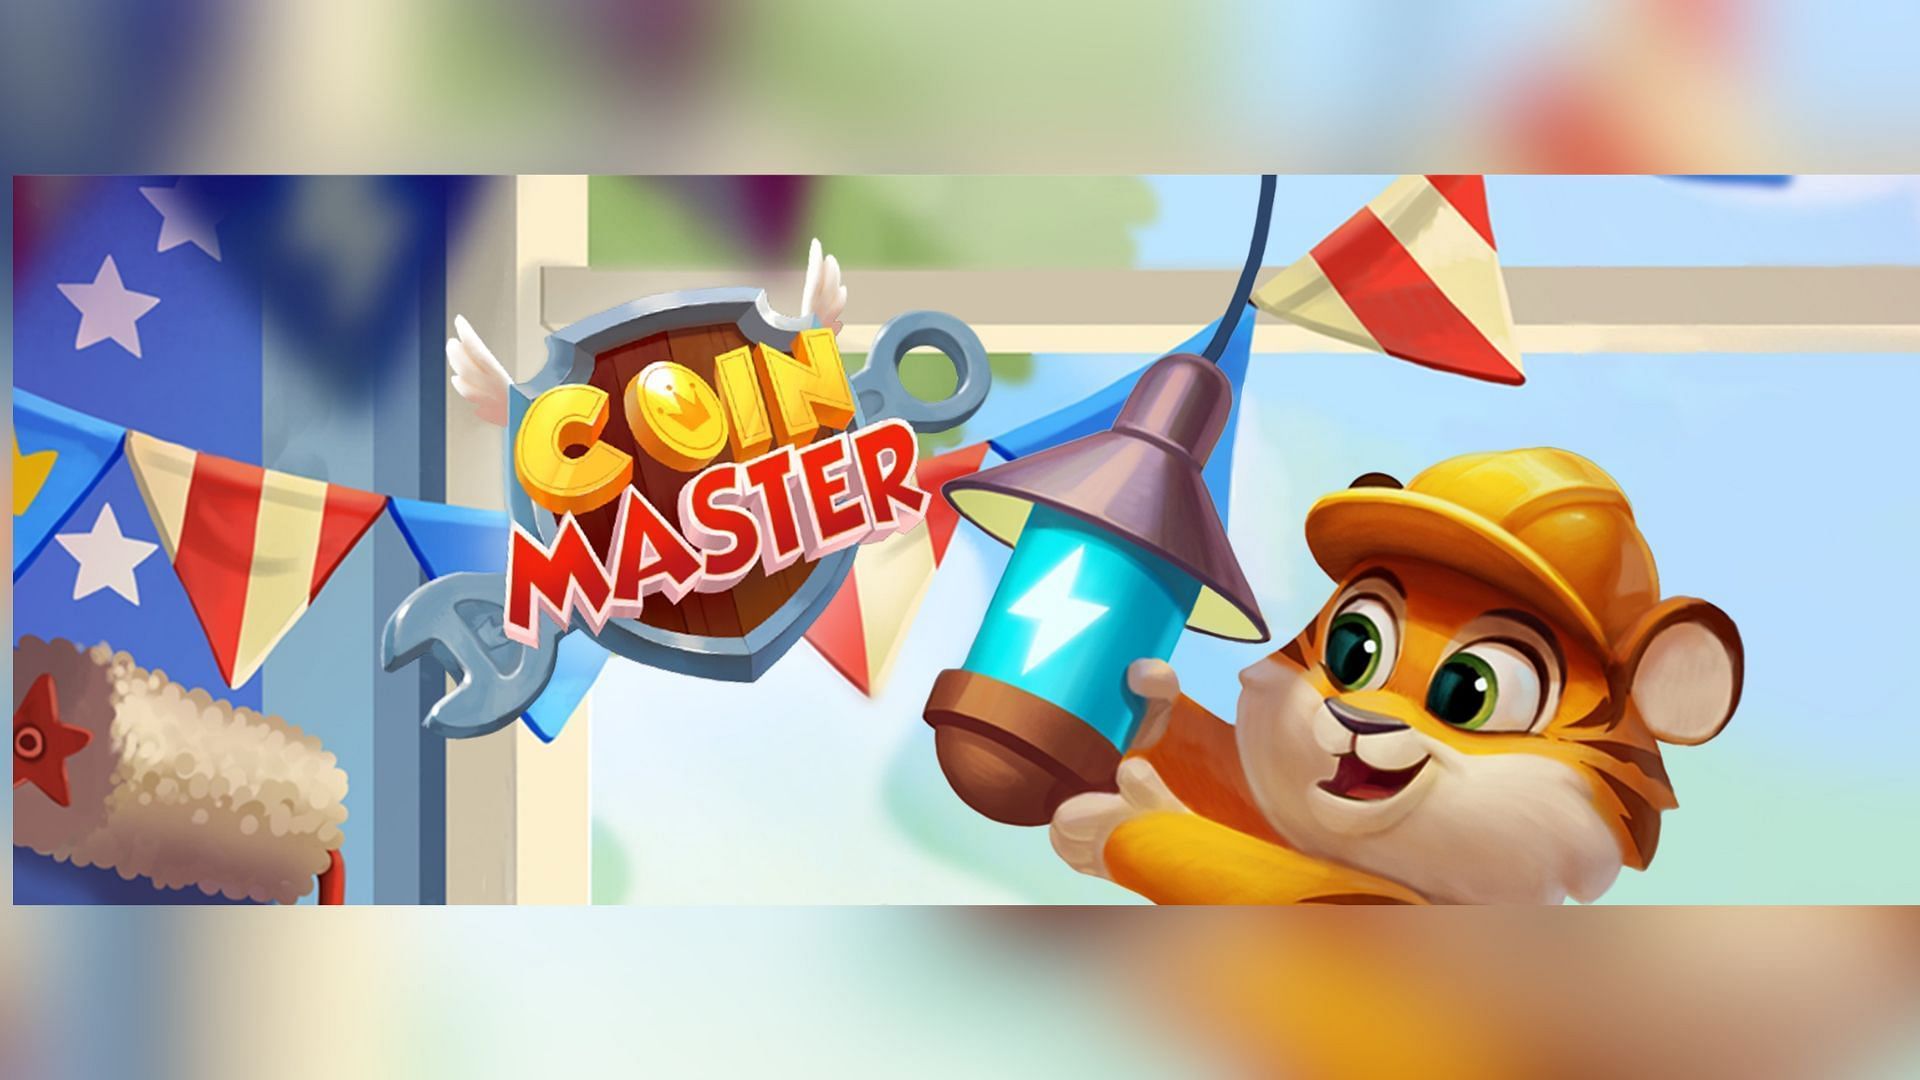 You can redeem links each passing day to get up to 100 free spins (Image via Moon Active)